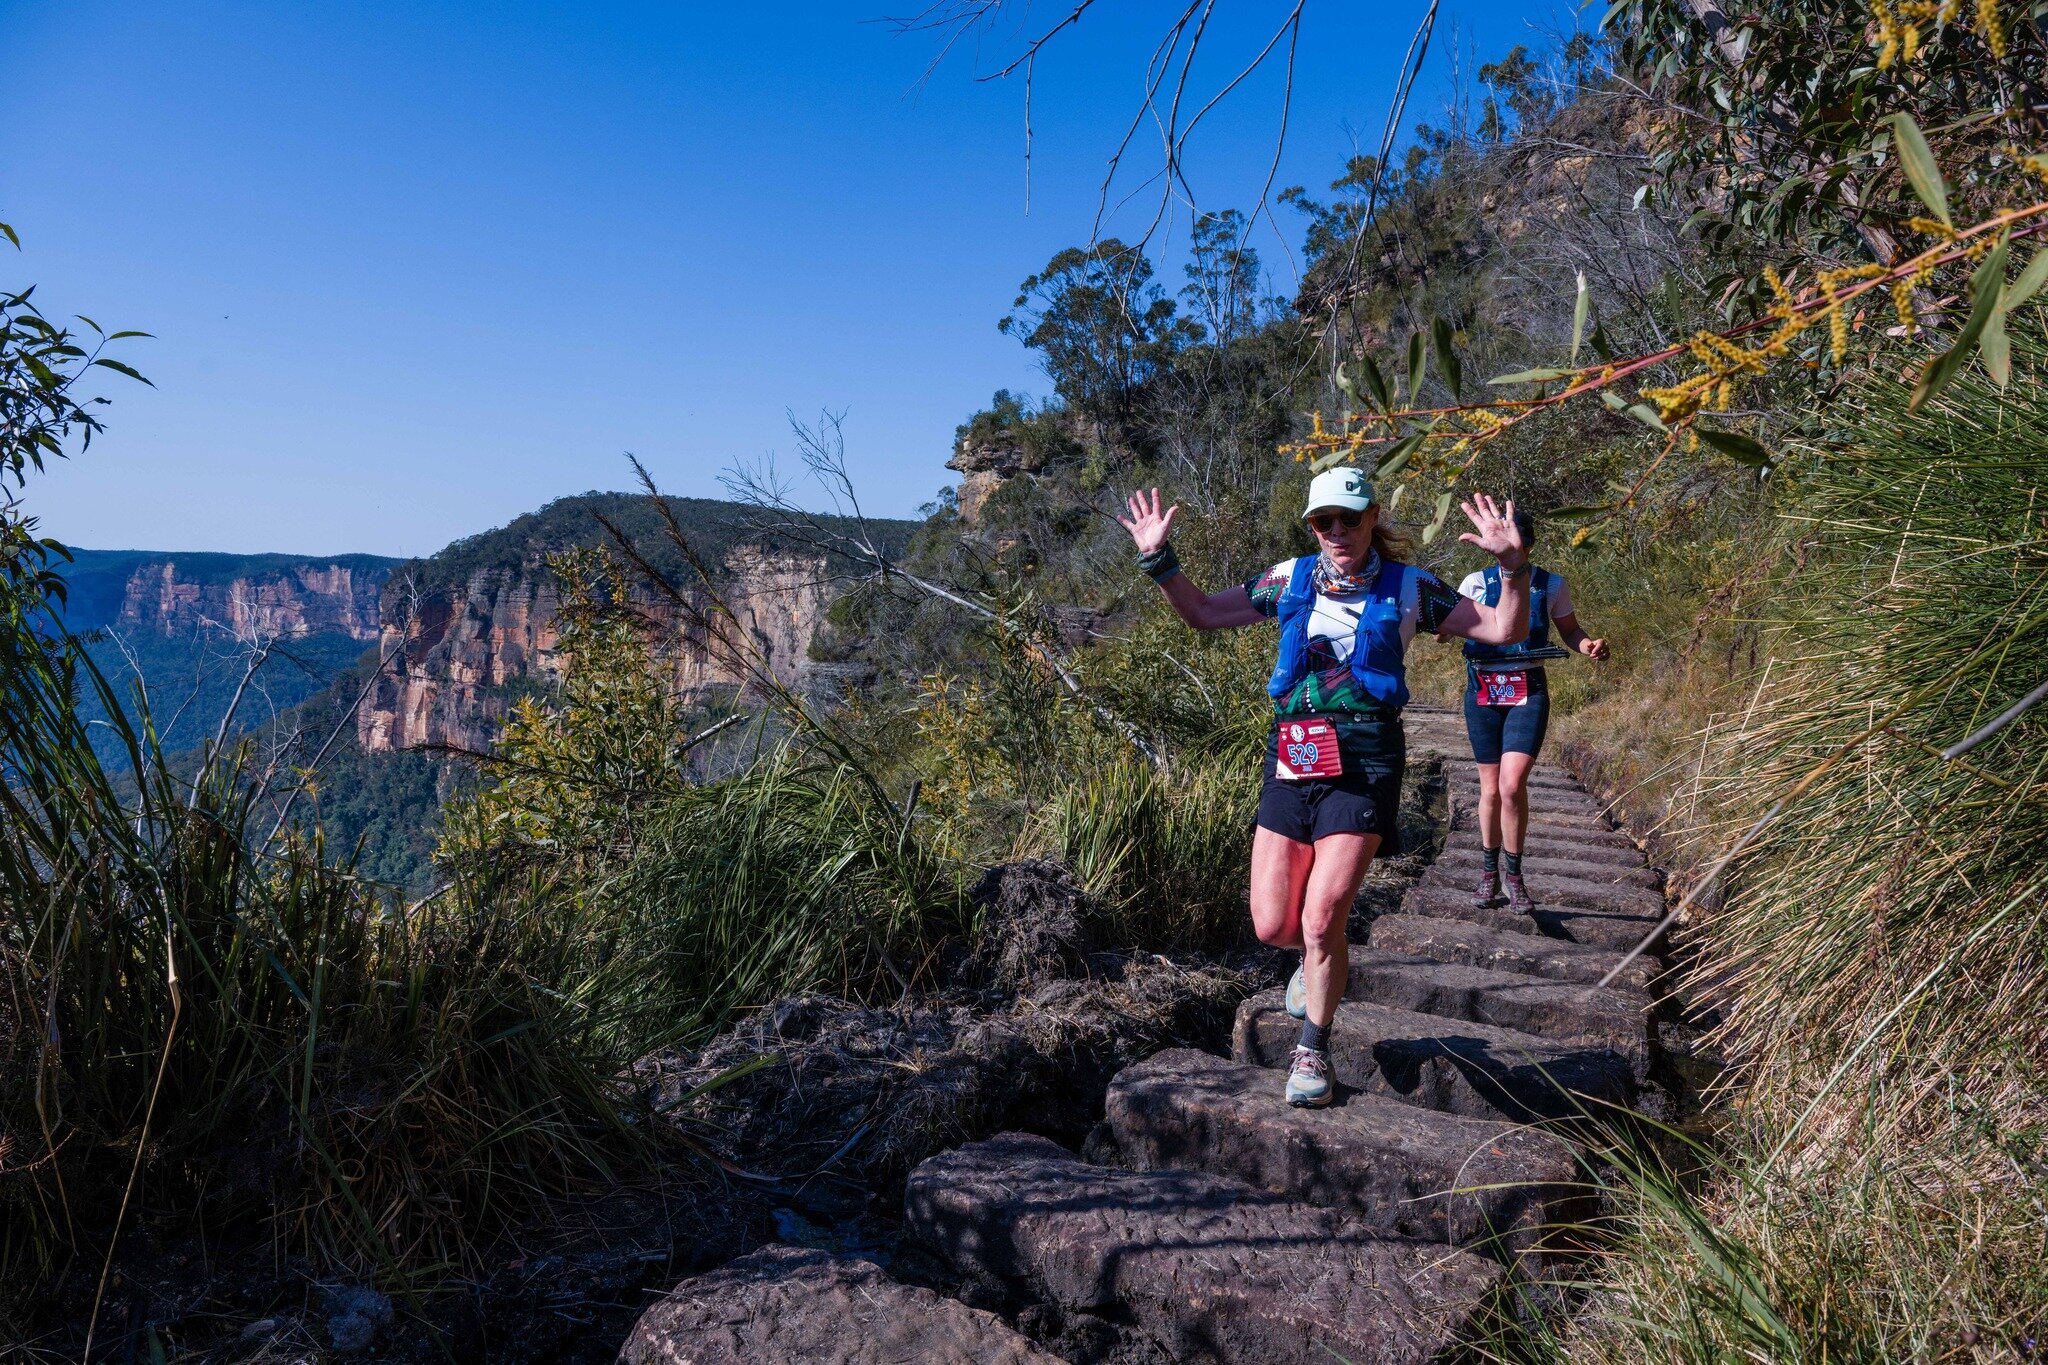 Double high 5s all round for these clifftop trails ✋ ✋ 

Pound for pound the most jaw dropping race in Oz

#trailrun #mountainrunner #high5 #FindYourEpic